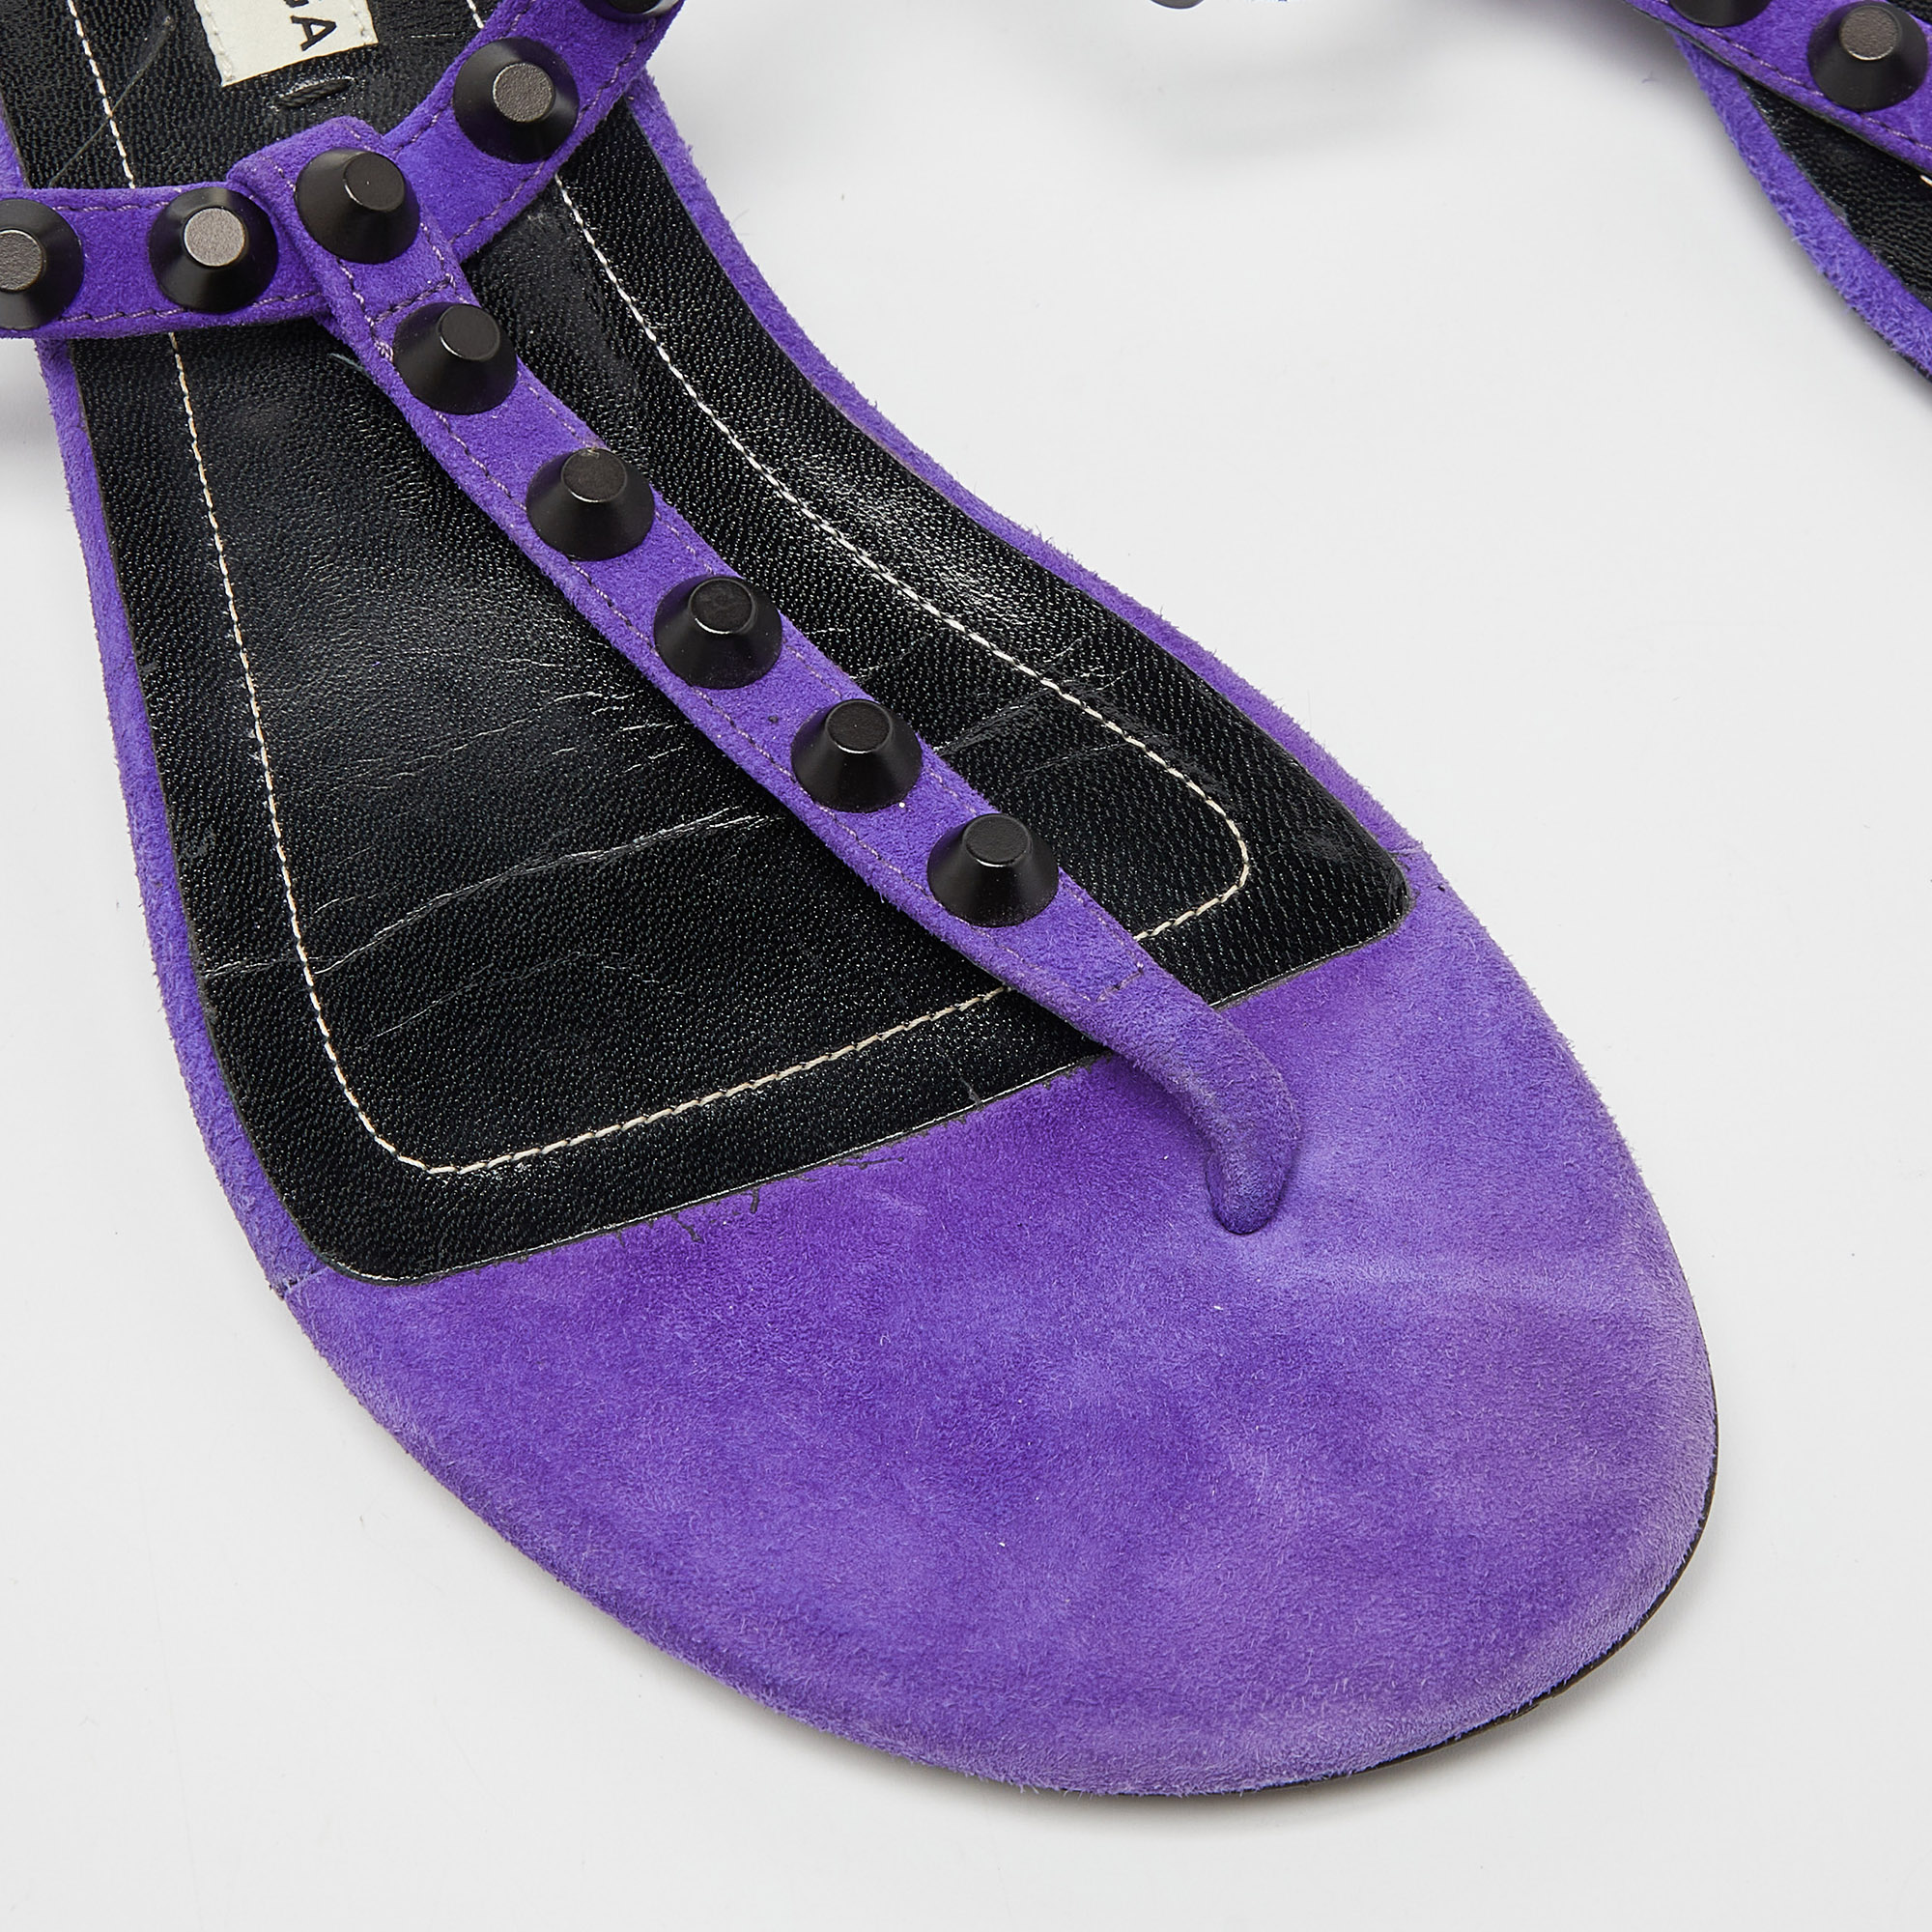 Balenciaga Purple Suede Arena Studded Thong Sandals Size 38.5